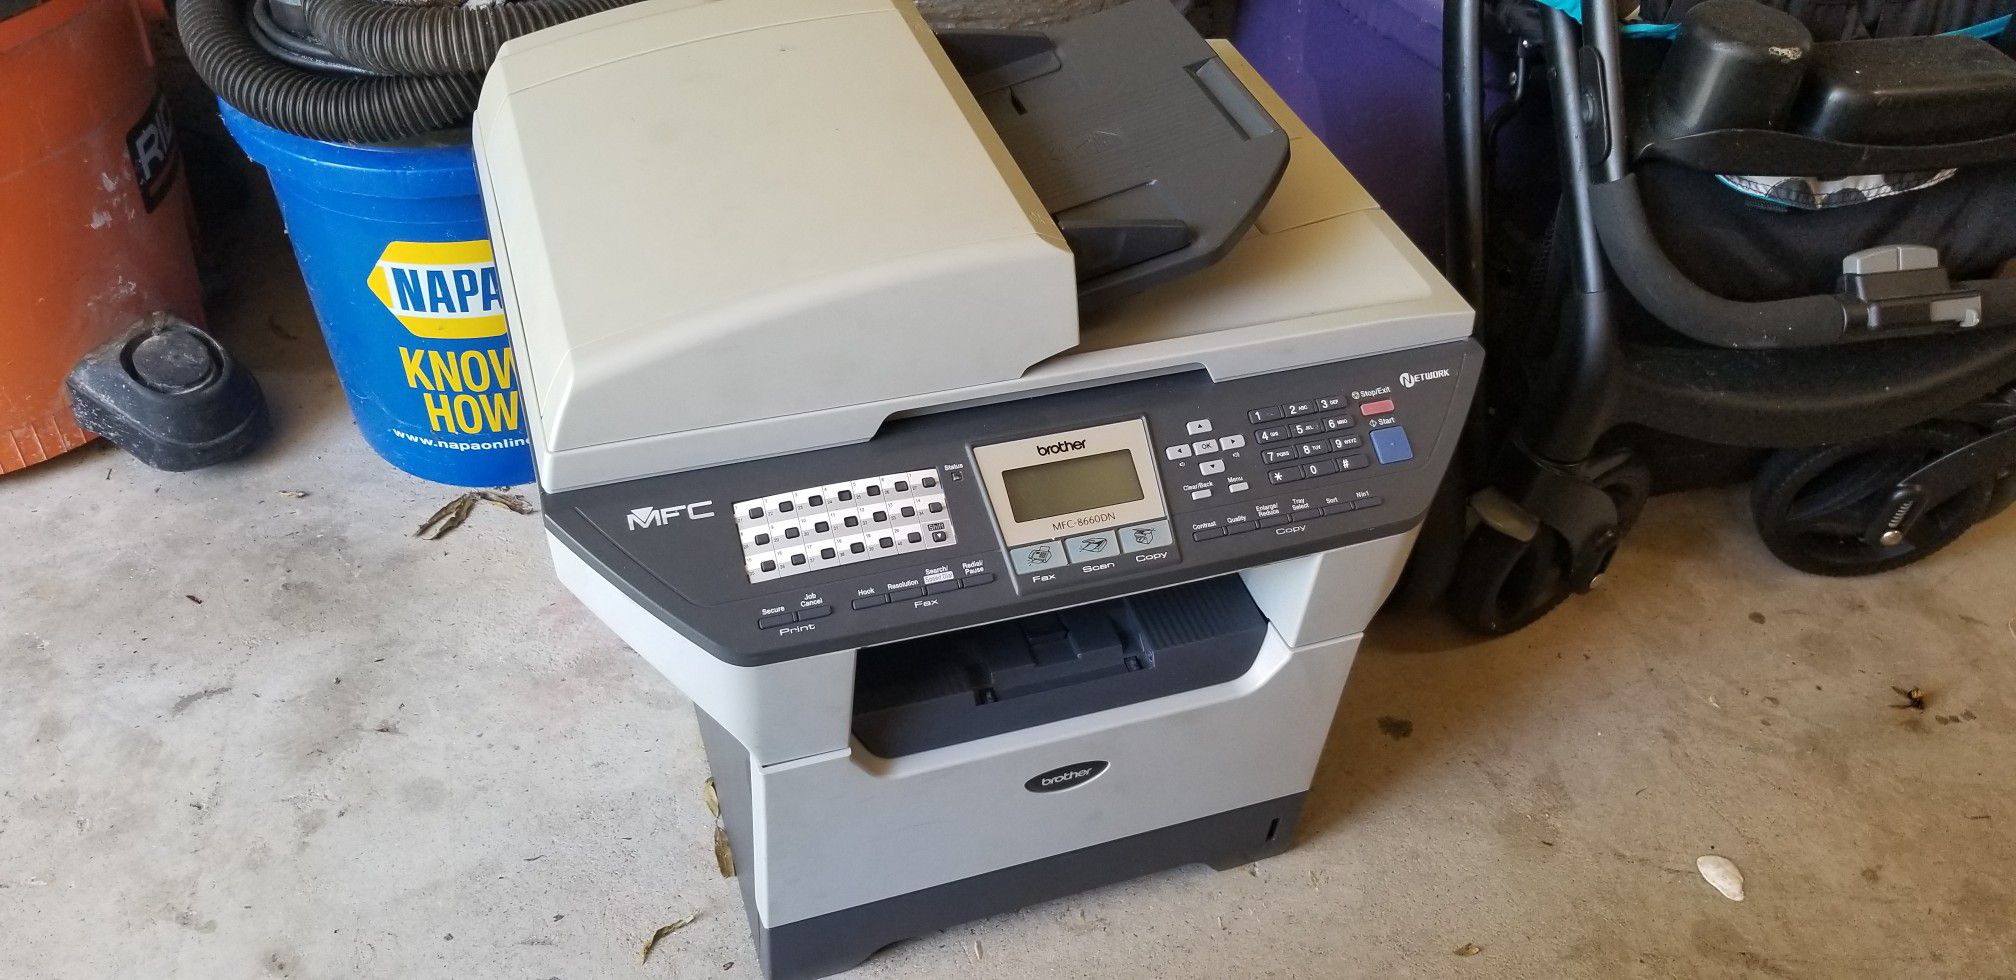 Brother MFC Network all in one Printer Copier Scan Fax Machine with ink and an extra toner